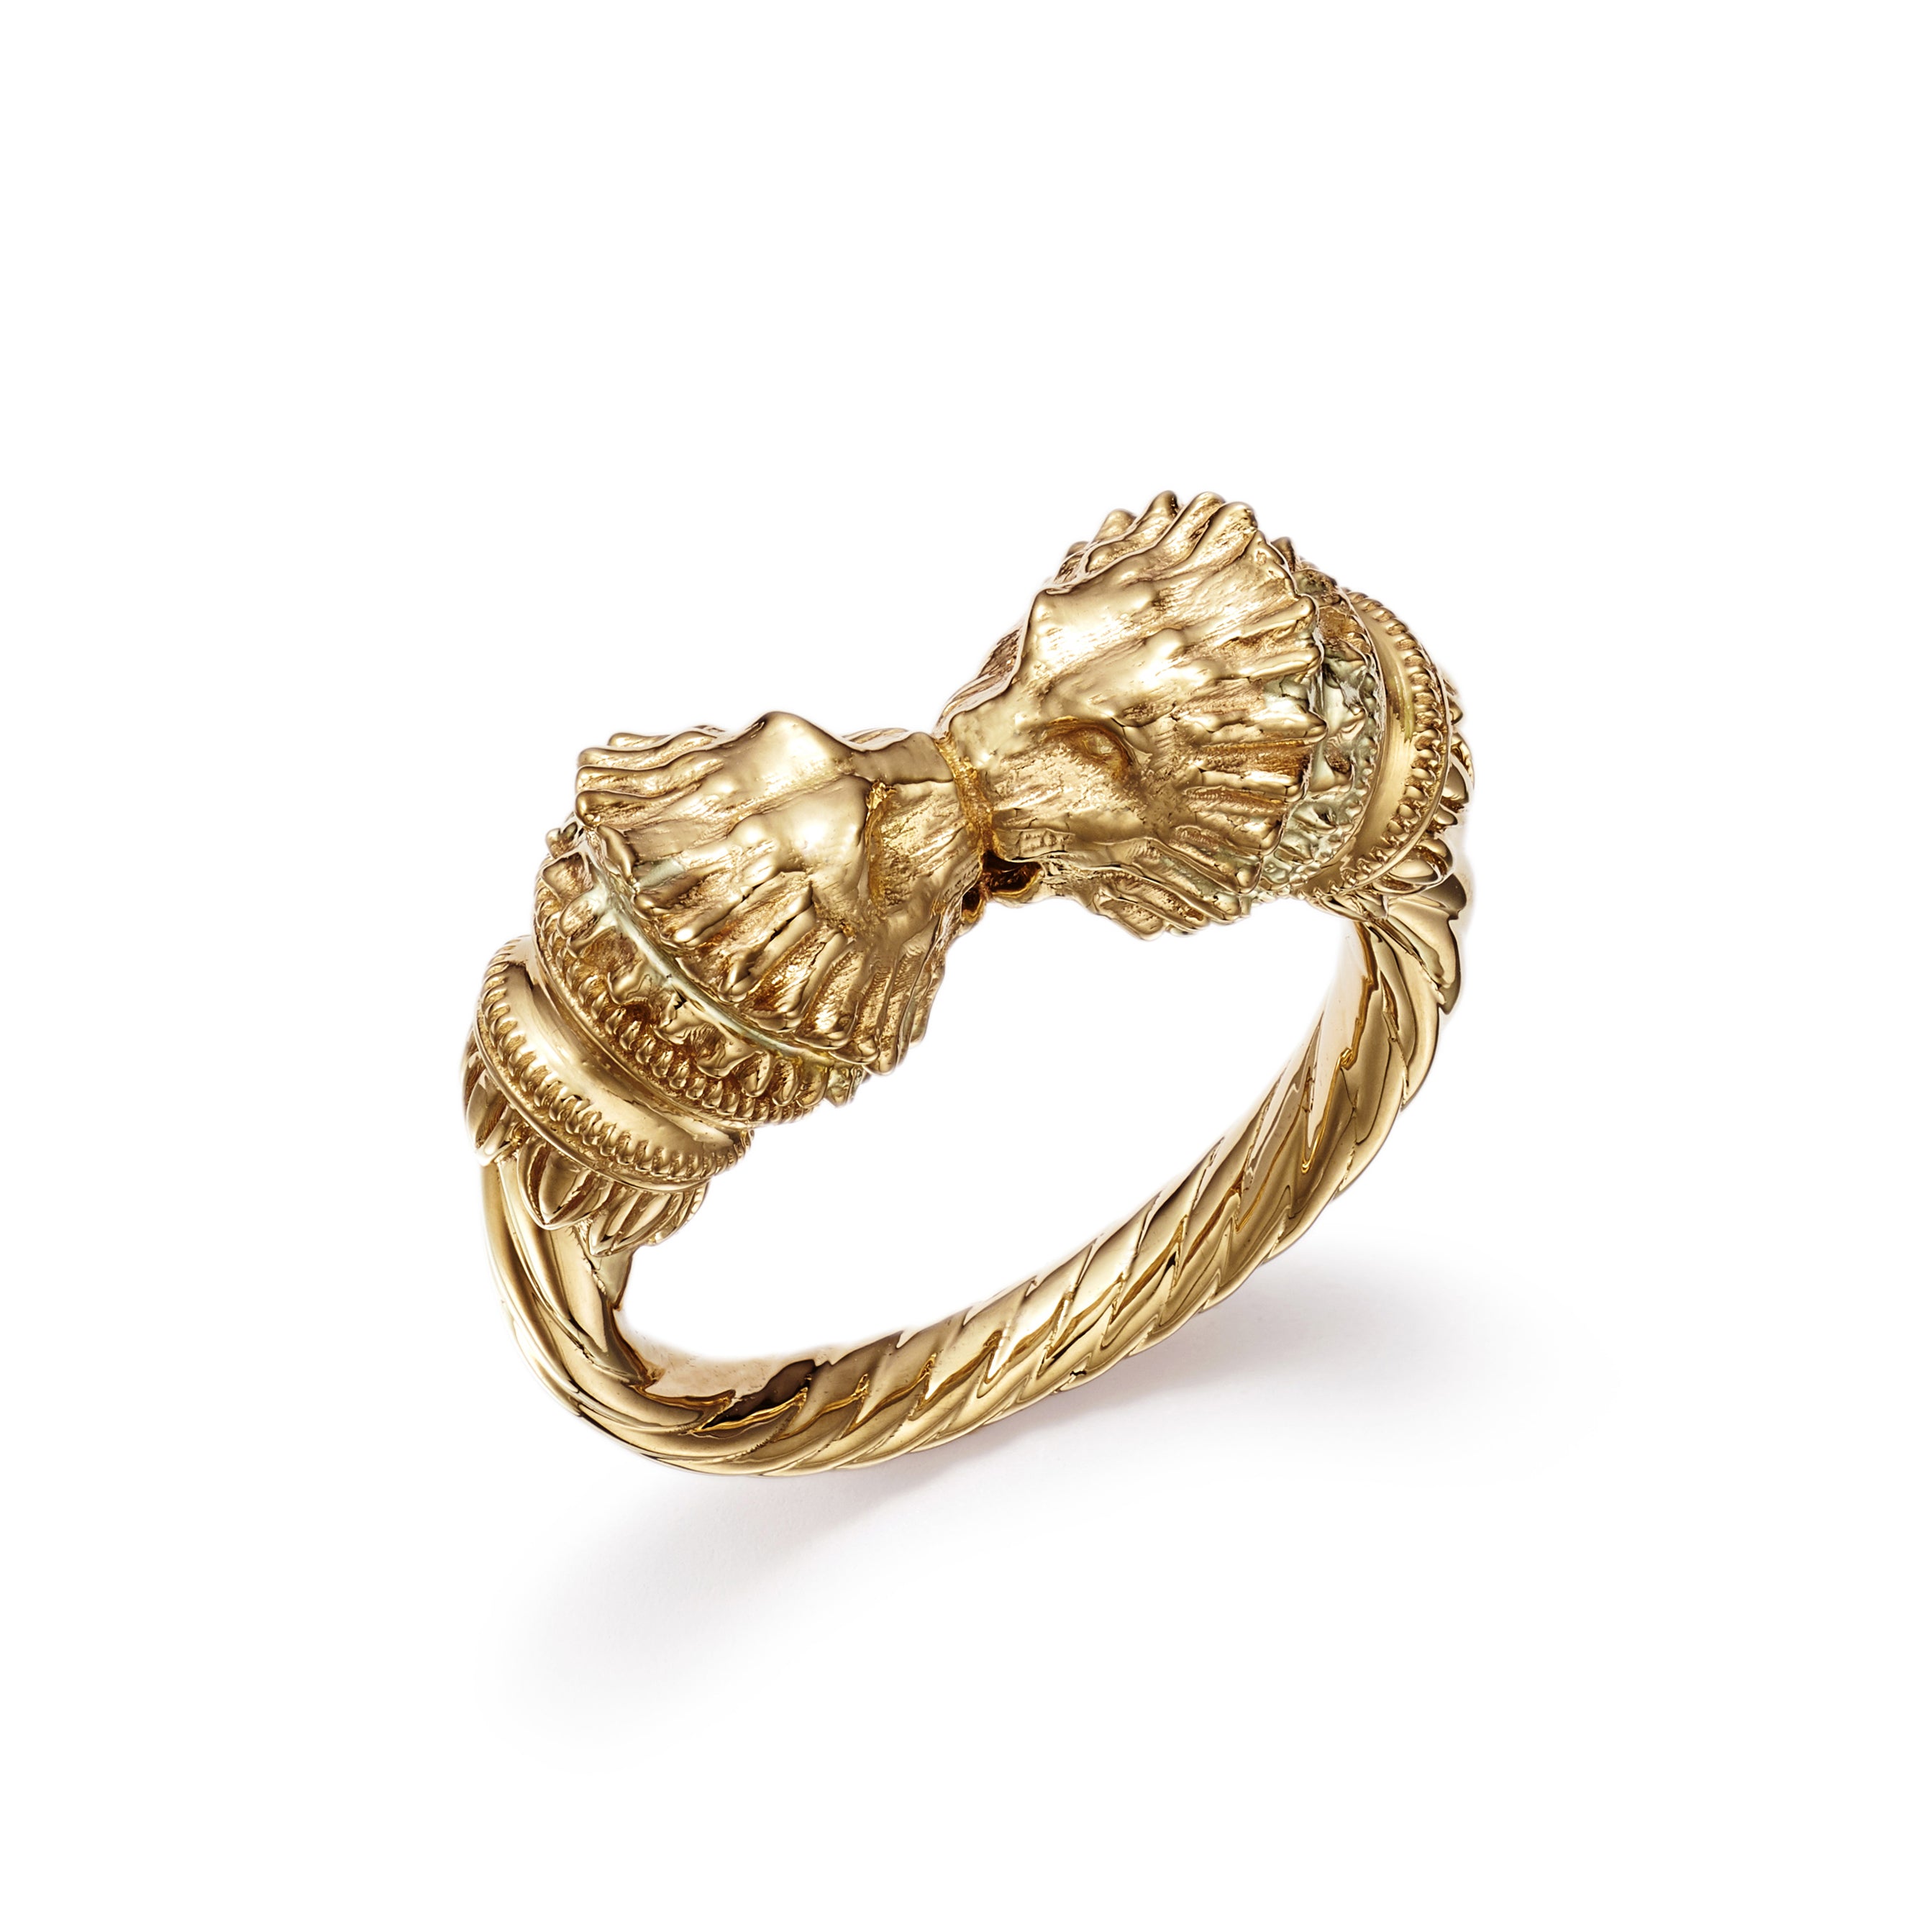 Fairmined Ecological Gold | Sustainable Gold